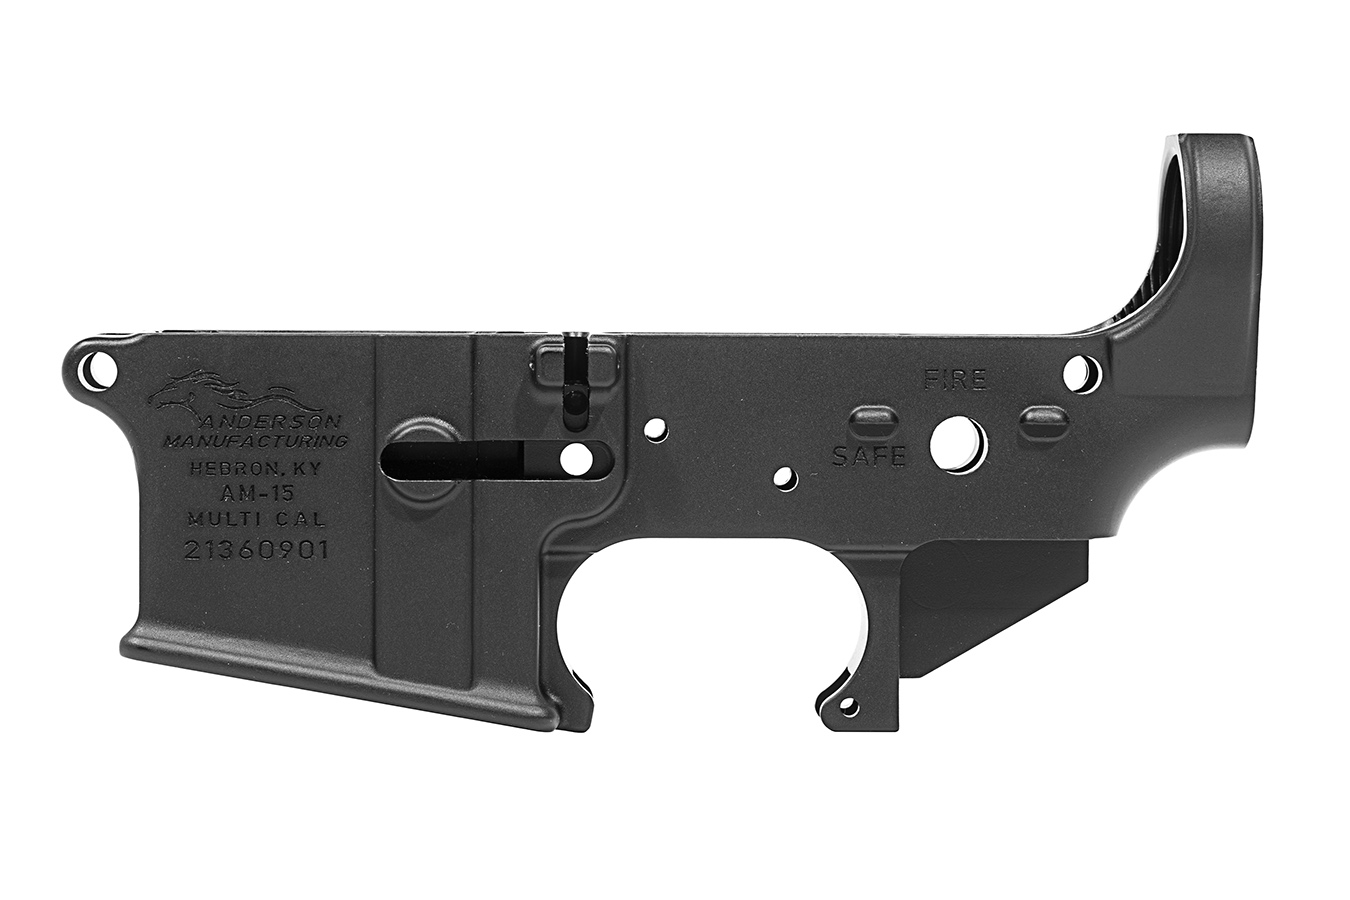 No. 15 Best Selling: ANDERSON MANUFACTURING AM-15 STRIPPED LOWER RECEIVER (MULTI CAL)